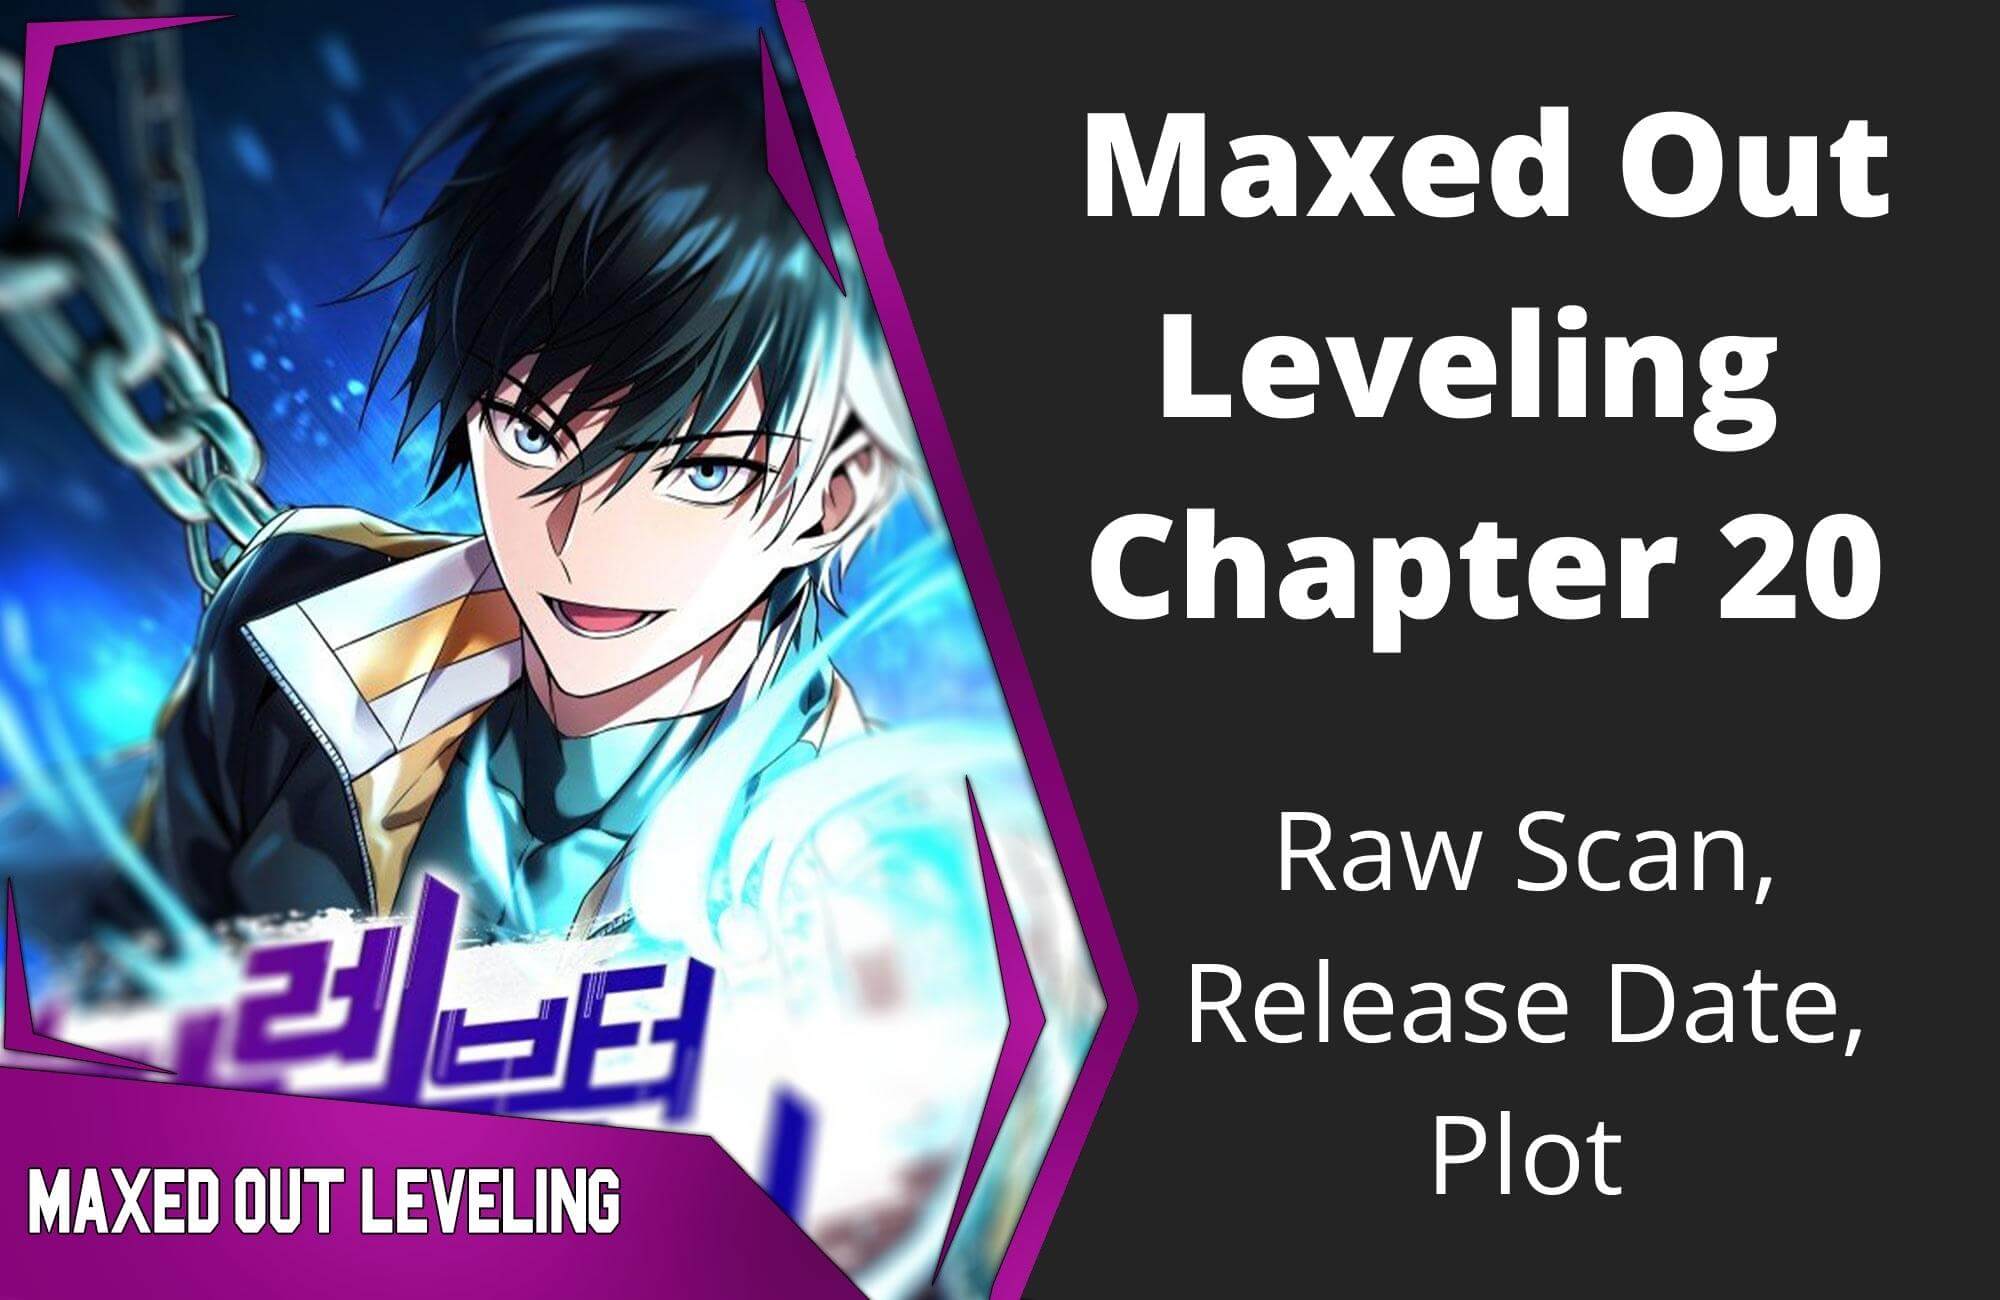 Maxed Out Leveling Chapter 20 Raw Scan, Release Date, Plot